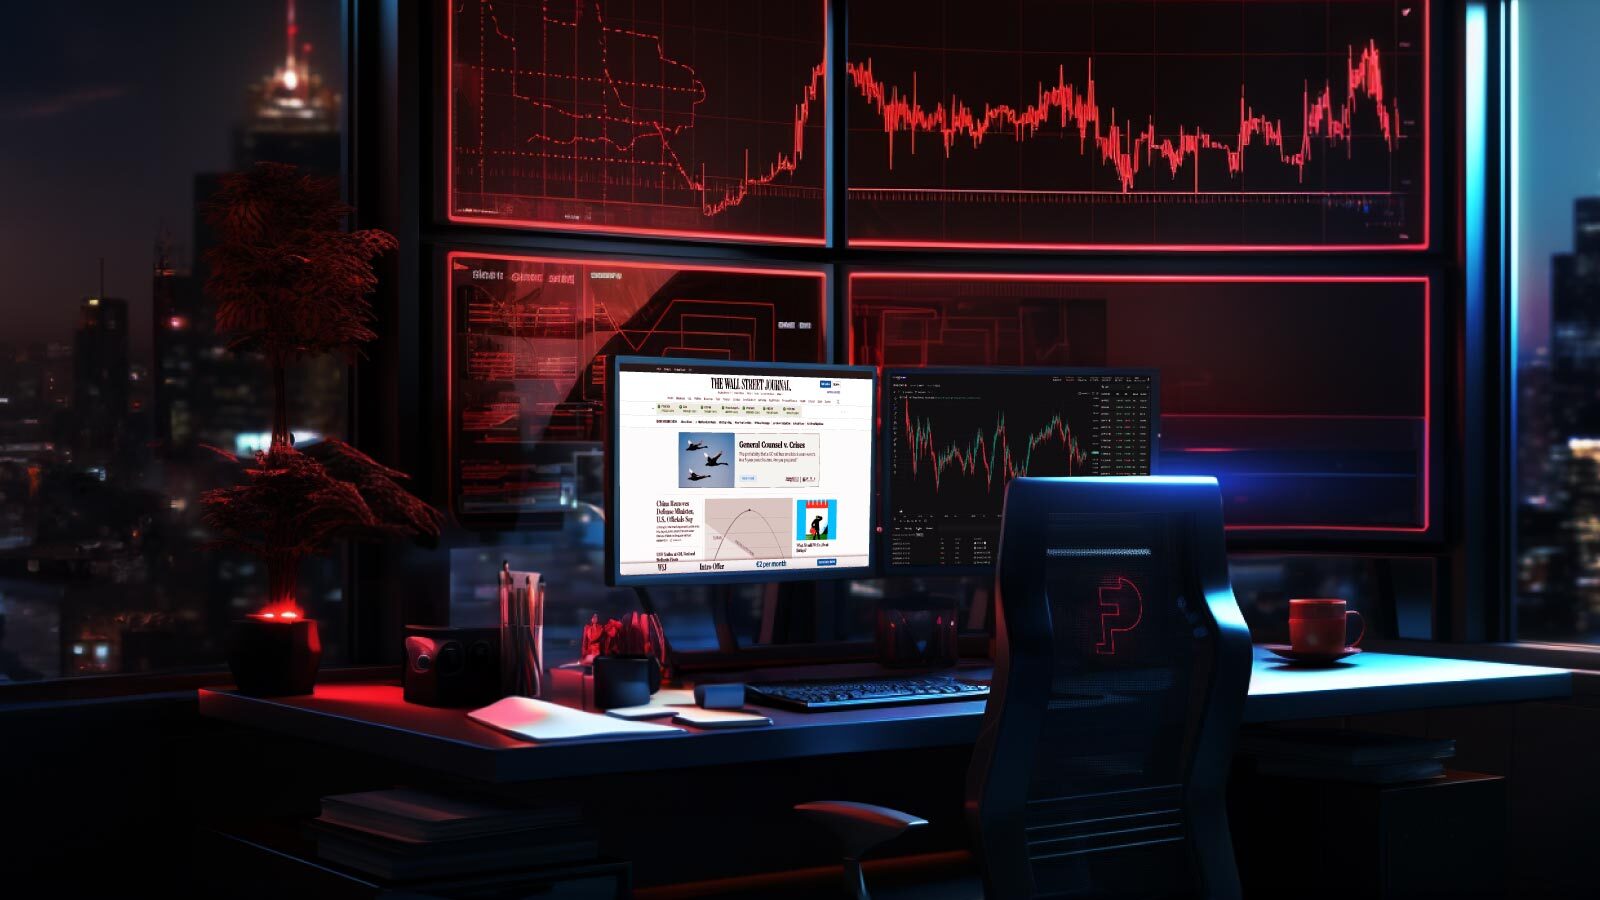 A trader's desk with the best trading resources available, such as trustworthy news outlets and a top-notch trading platform